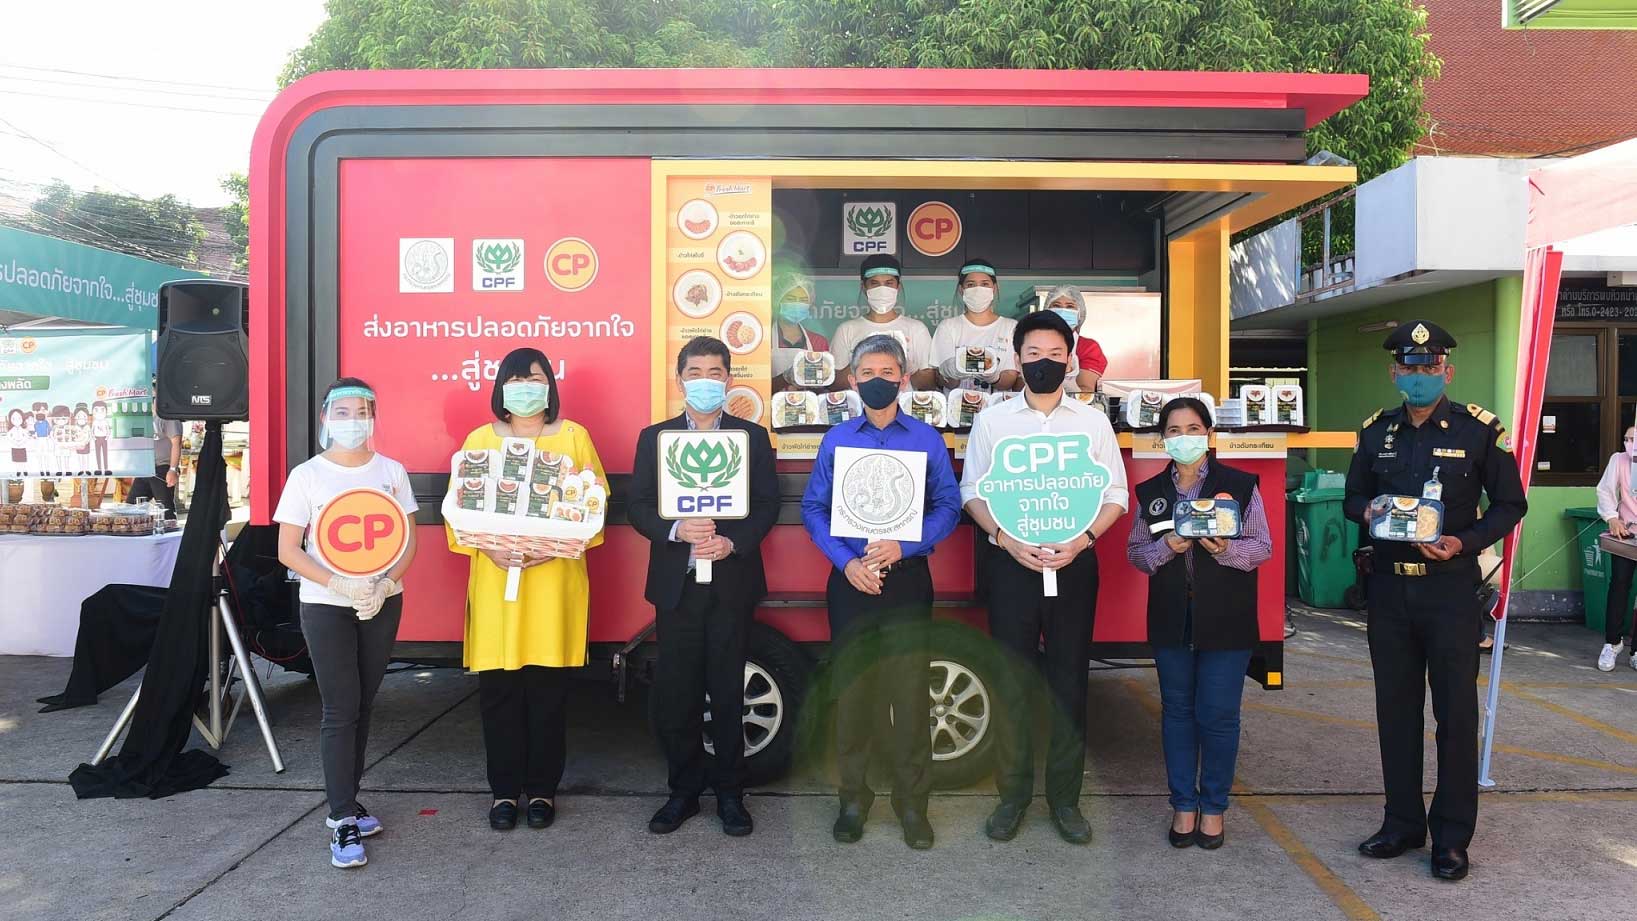 CPF’s food truck serves delicious foods to people in Bangphlat